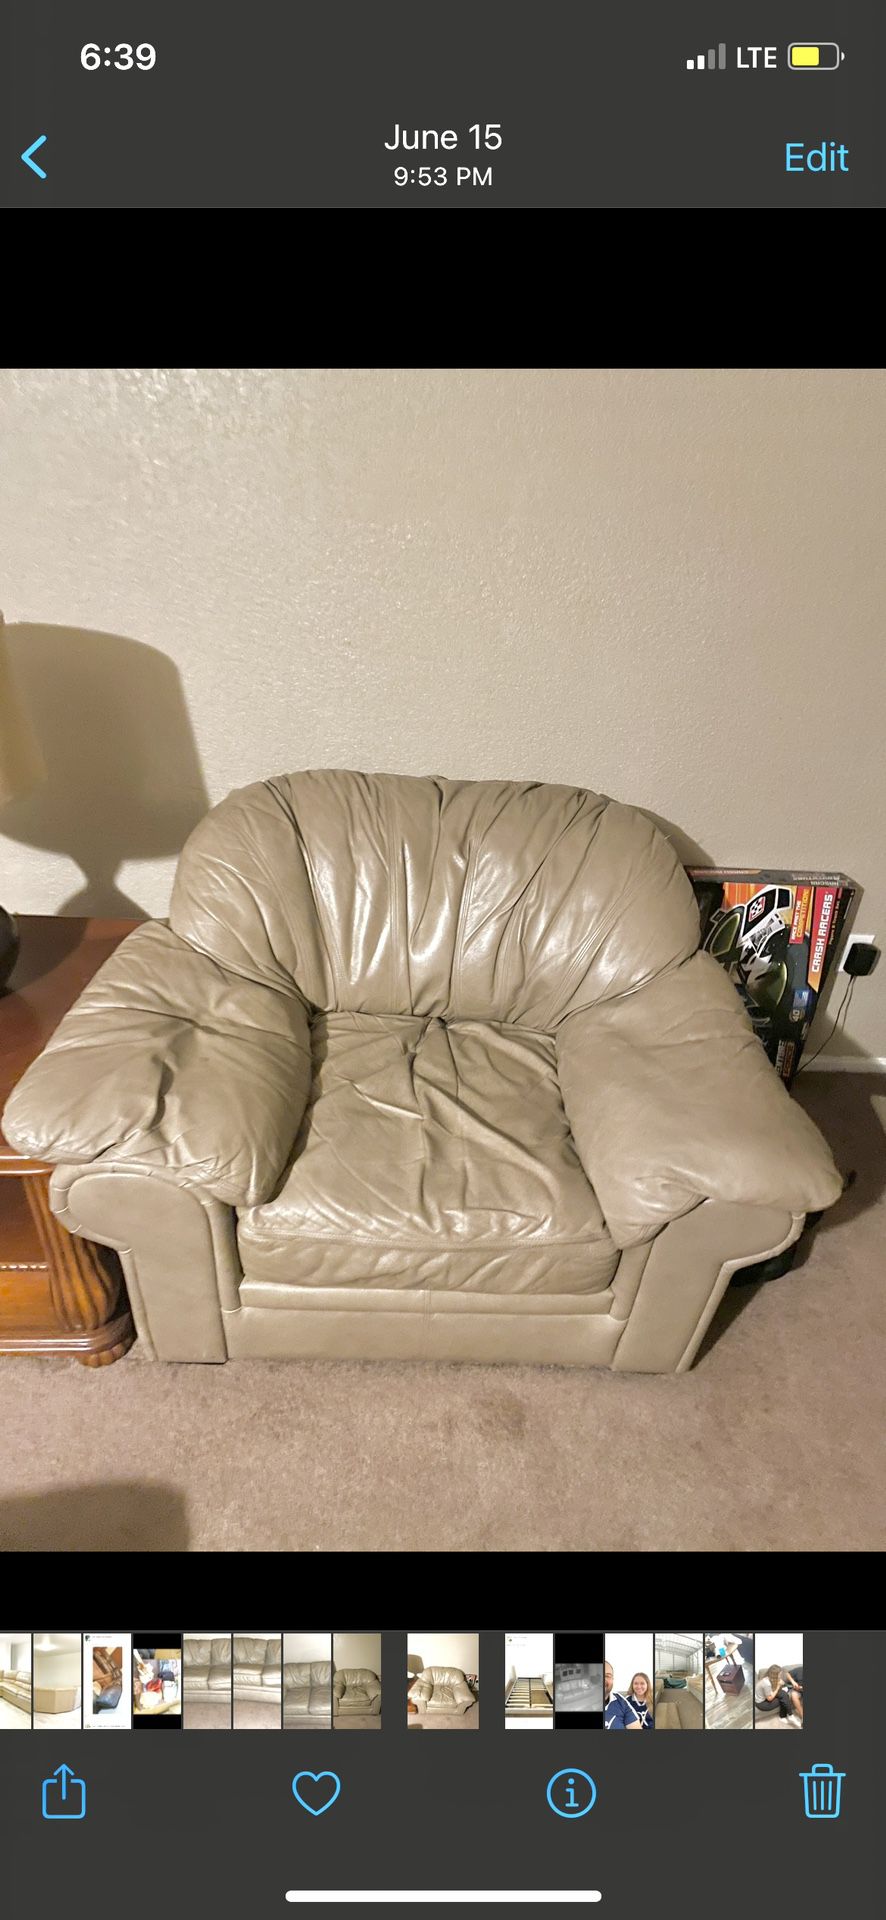 Loveseat And Chair 